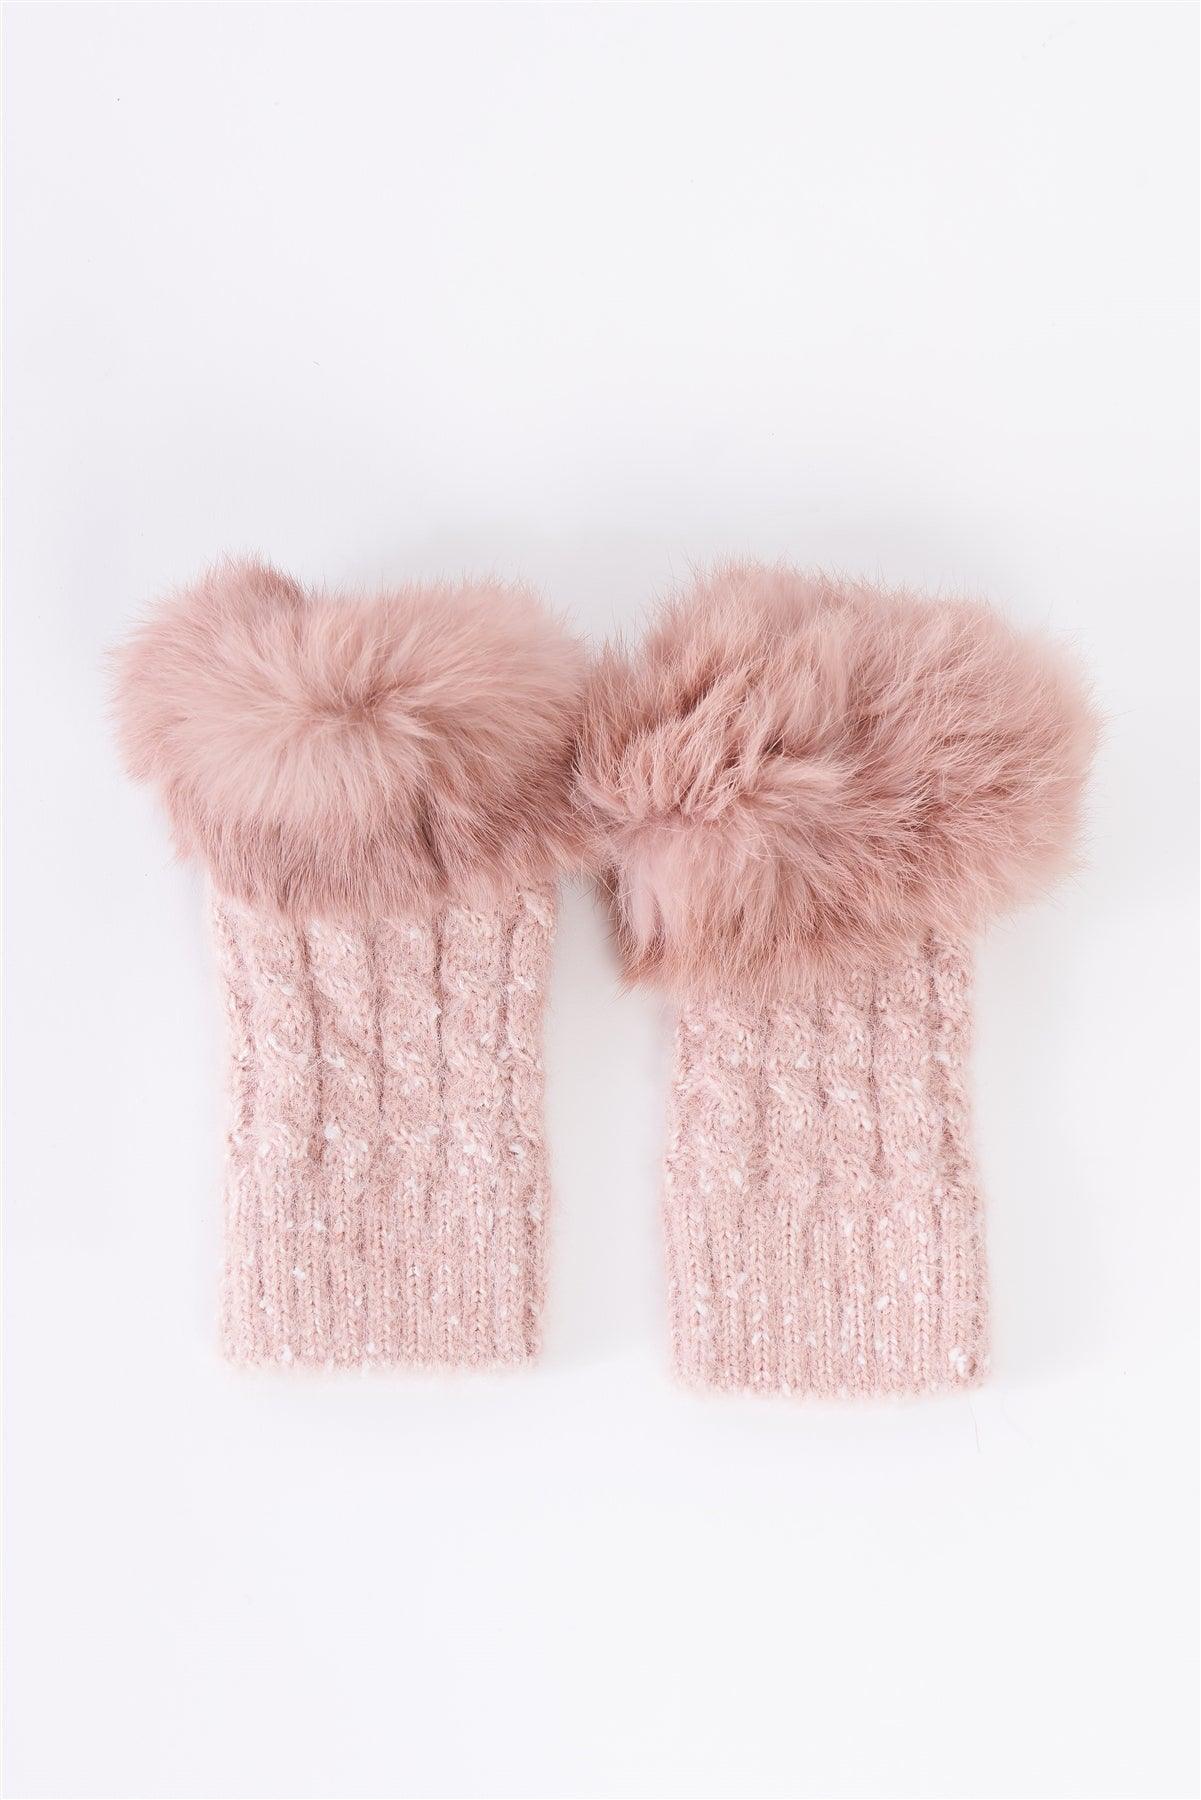 Pink Woven Furry Fingerless Two-Way Winter Gloves /3 Pieces